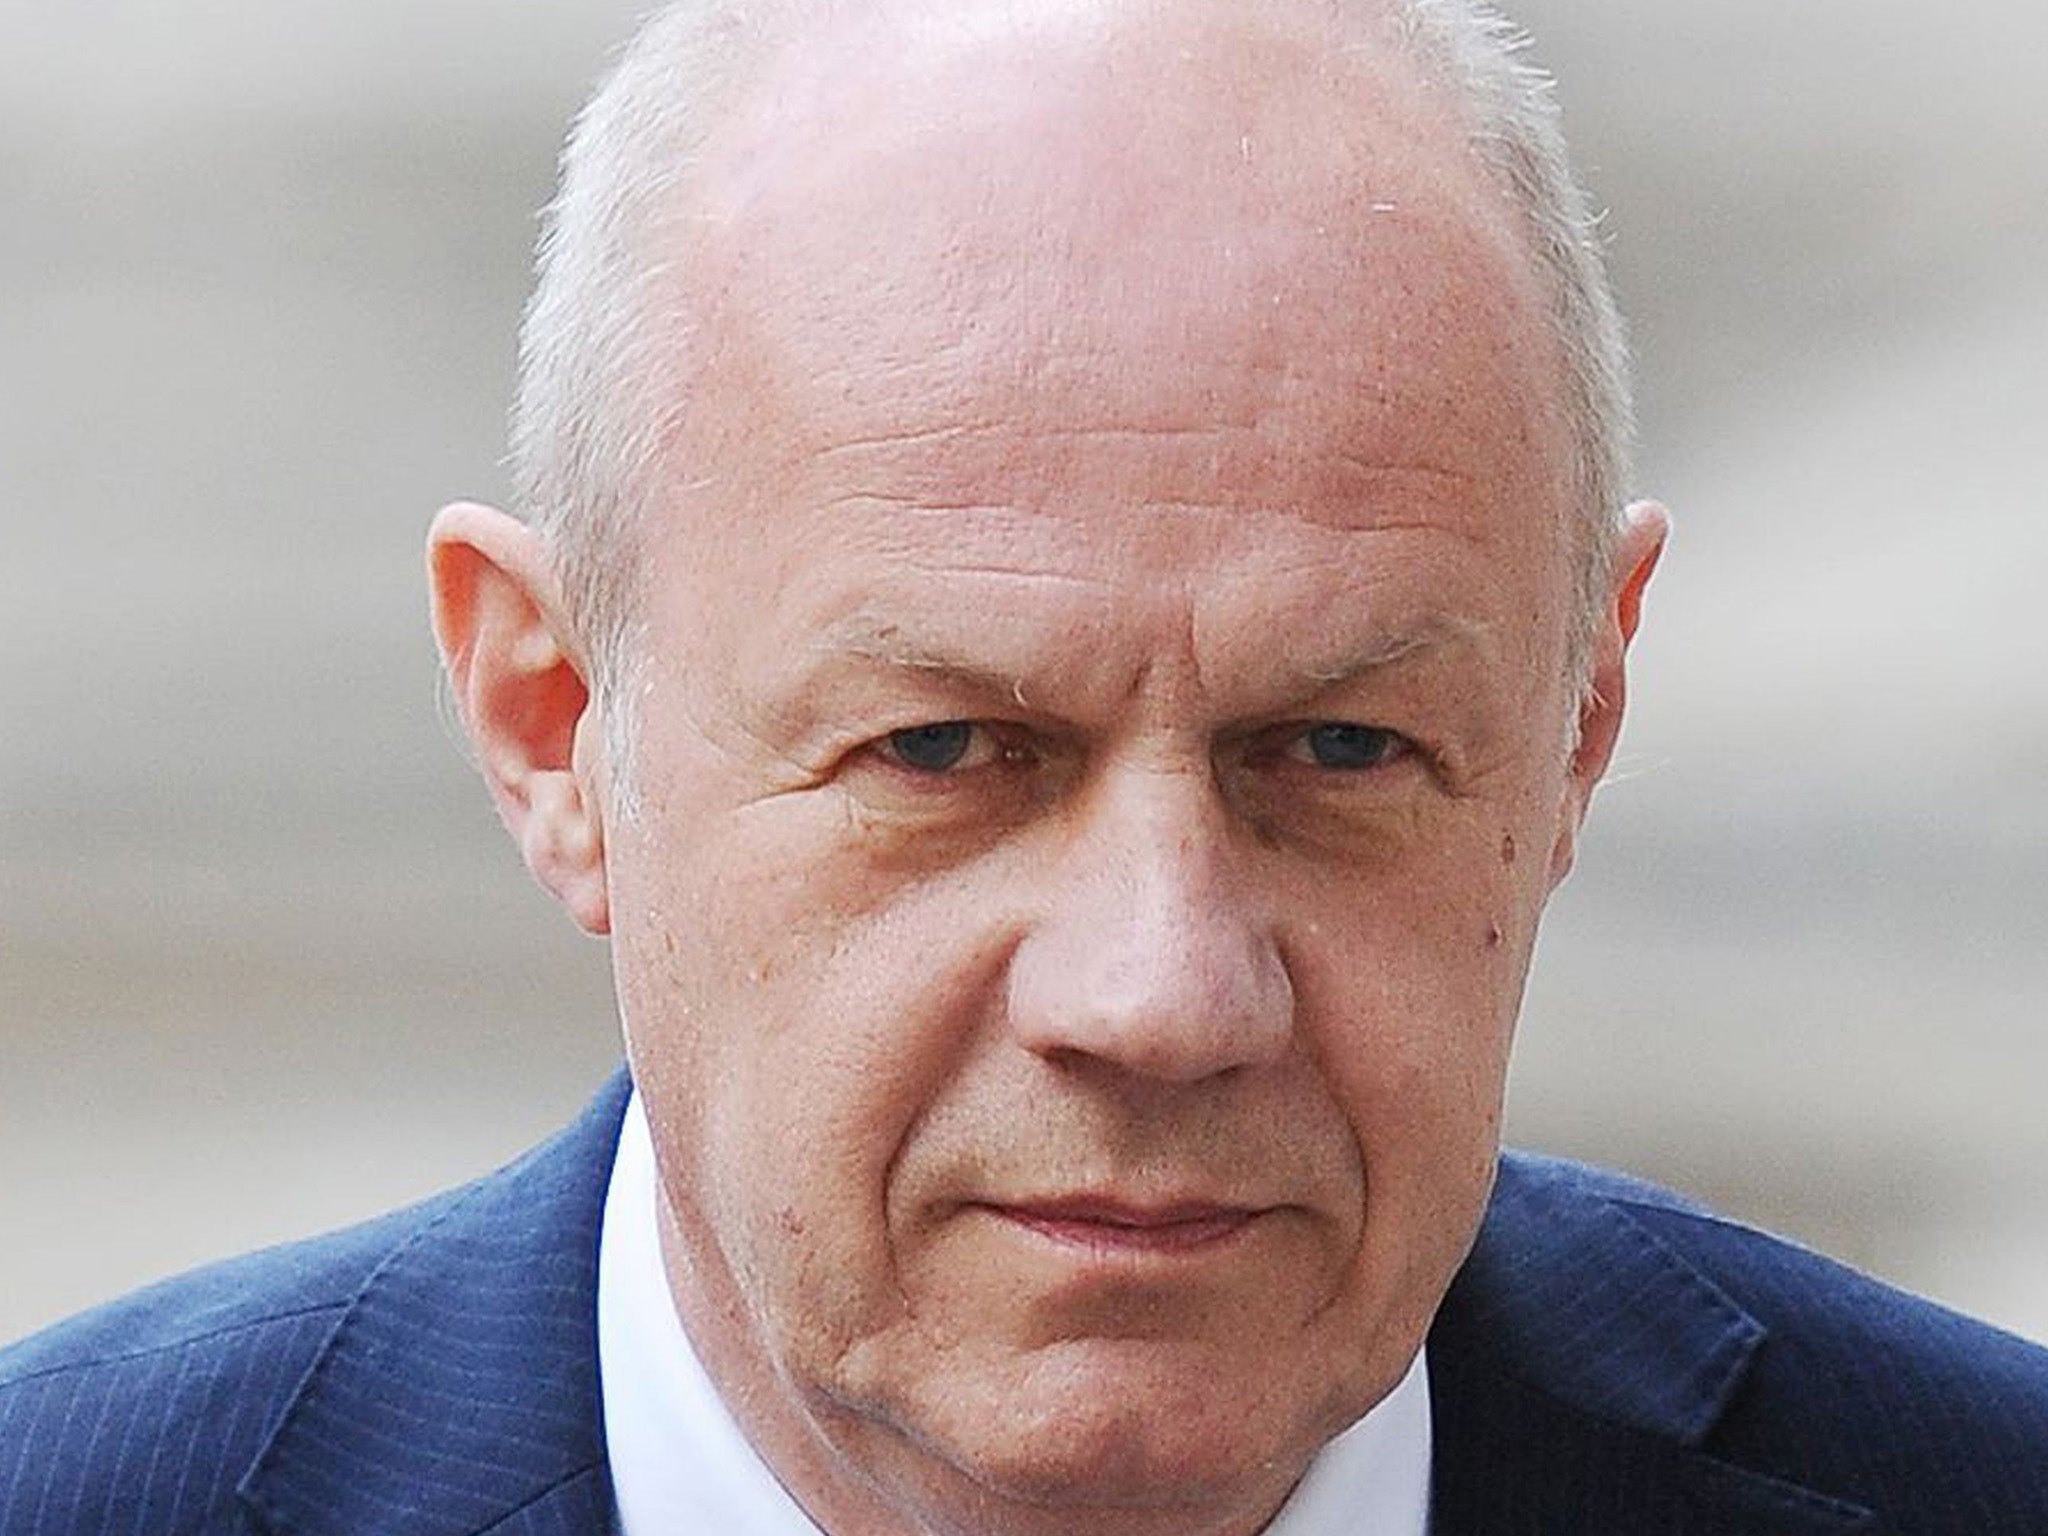 Police Inspector Porn - Damian Green computer porn allegations should not have been leaked ...